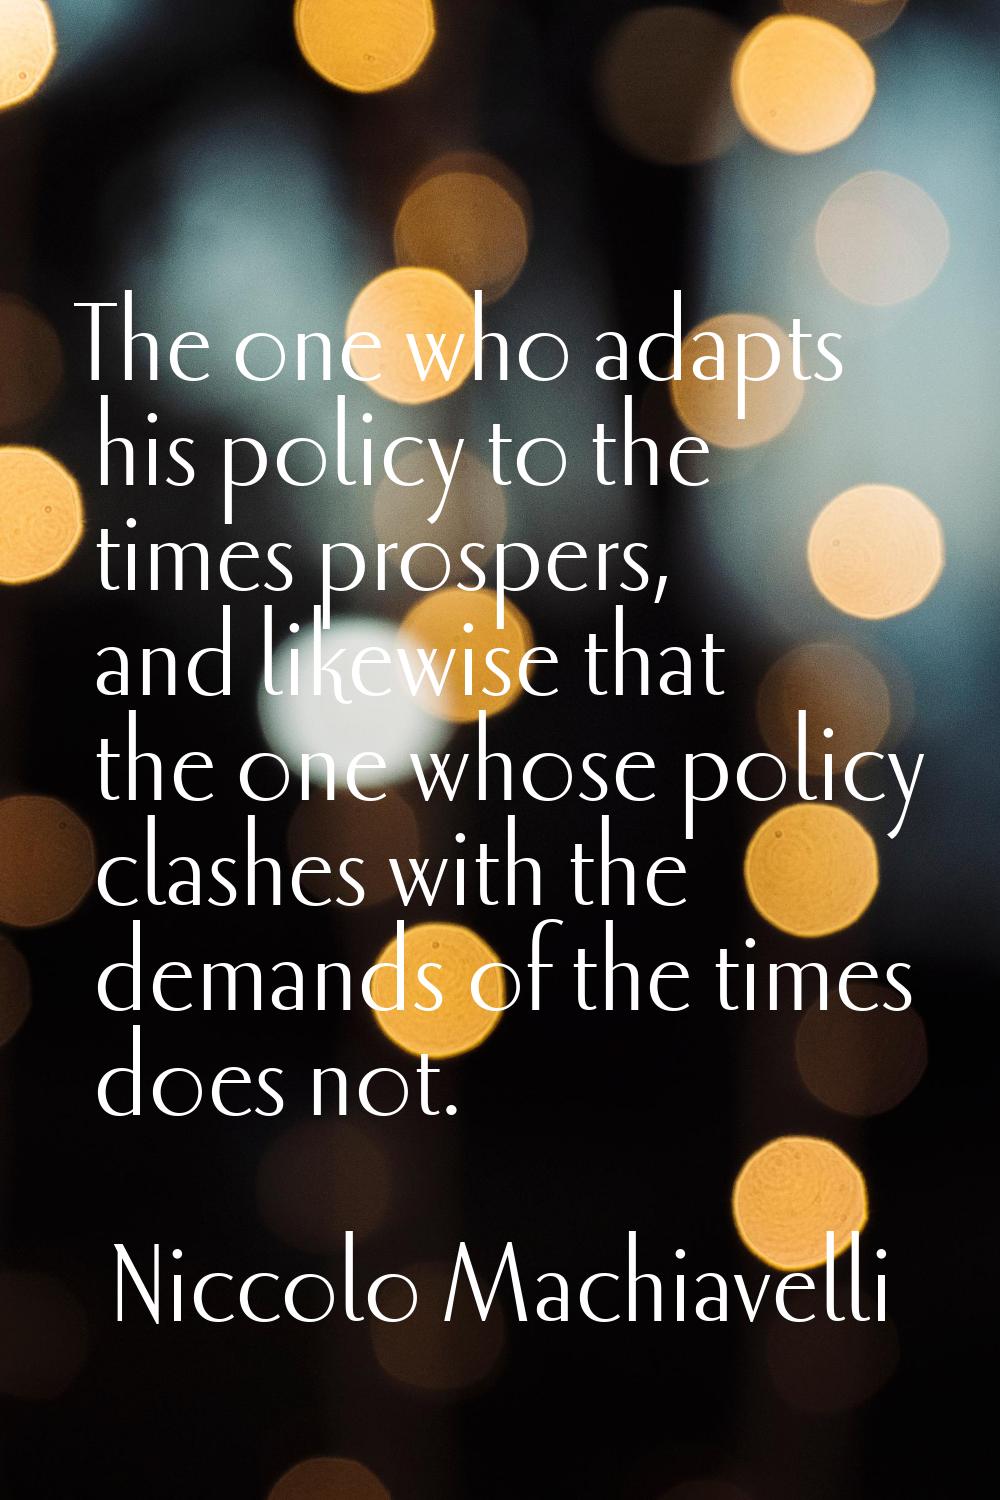 The one who adapts his policy to the times prospers, and likewise that the one whose policy clashes